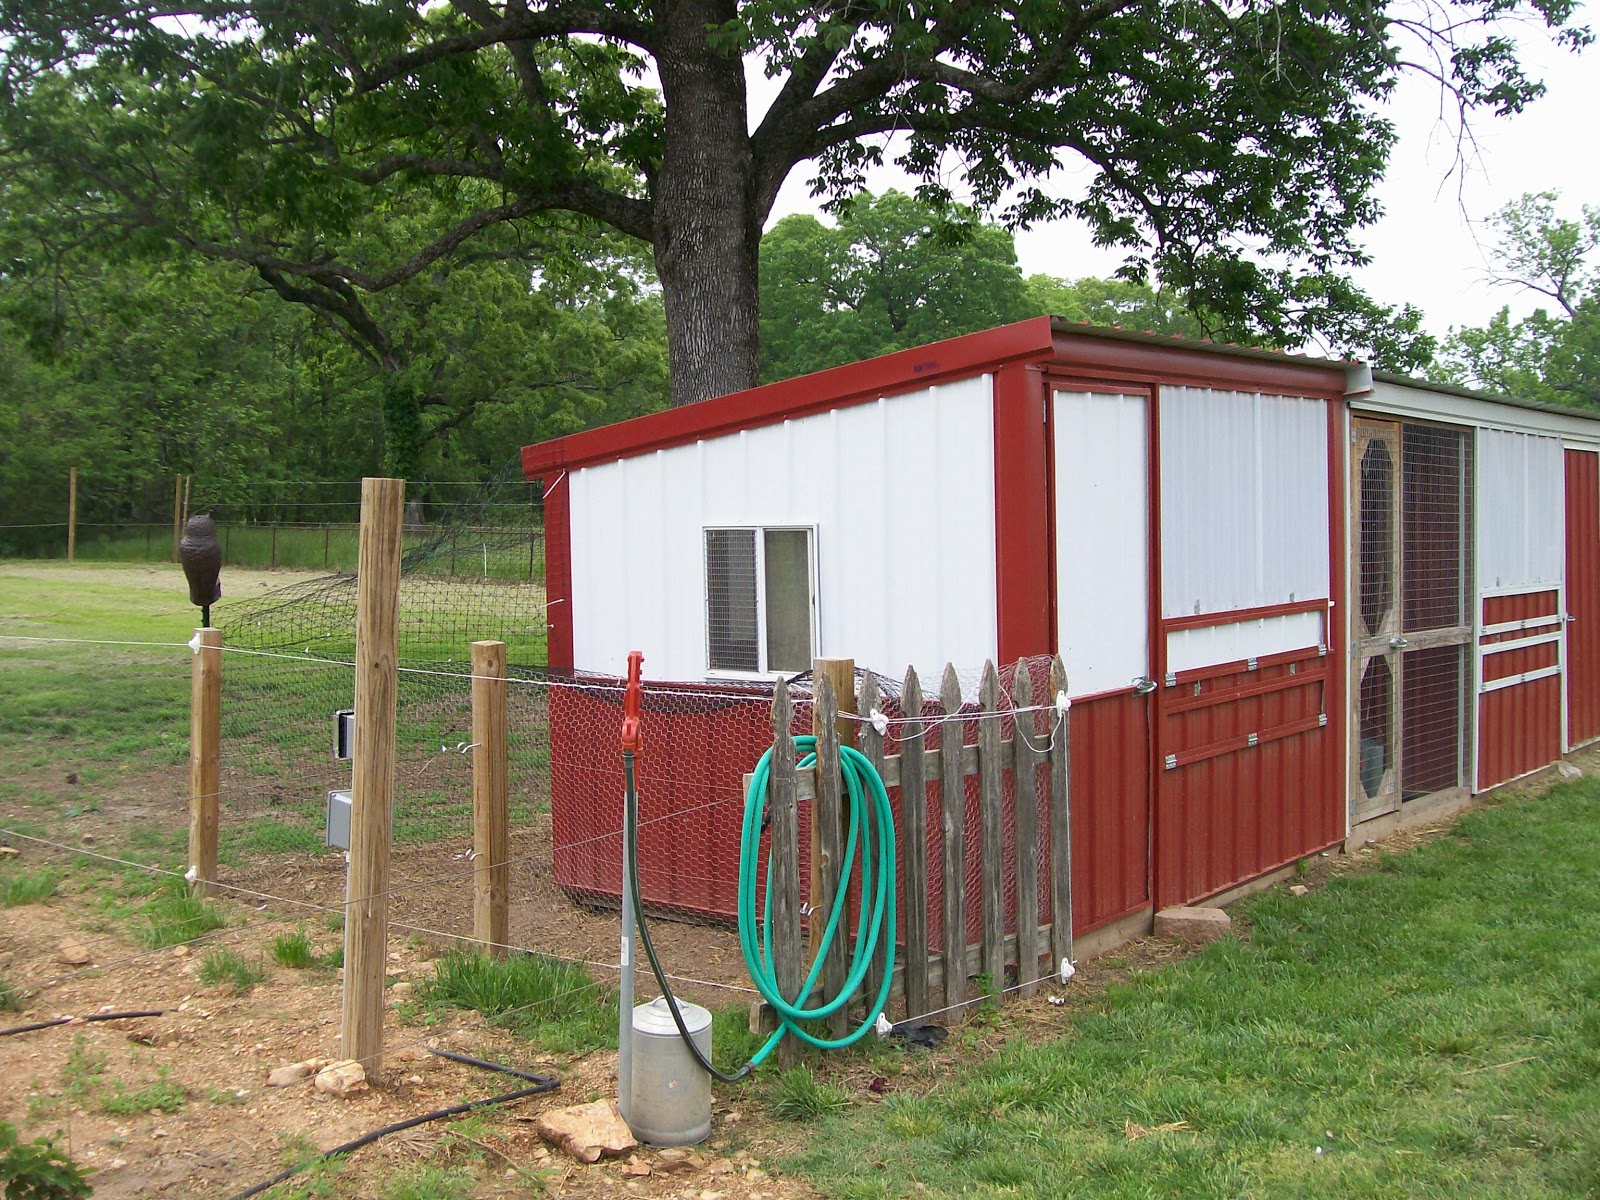 Chicken Coop is located in the shaded tree area and is included in the ...